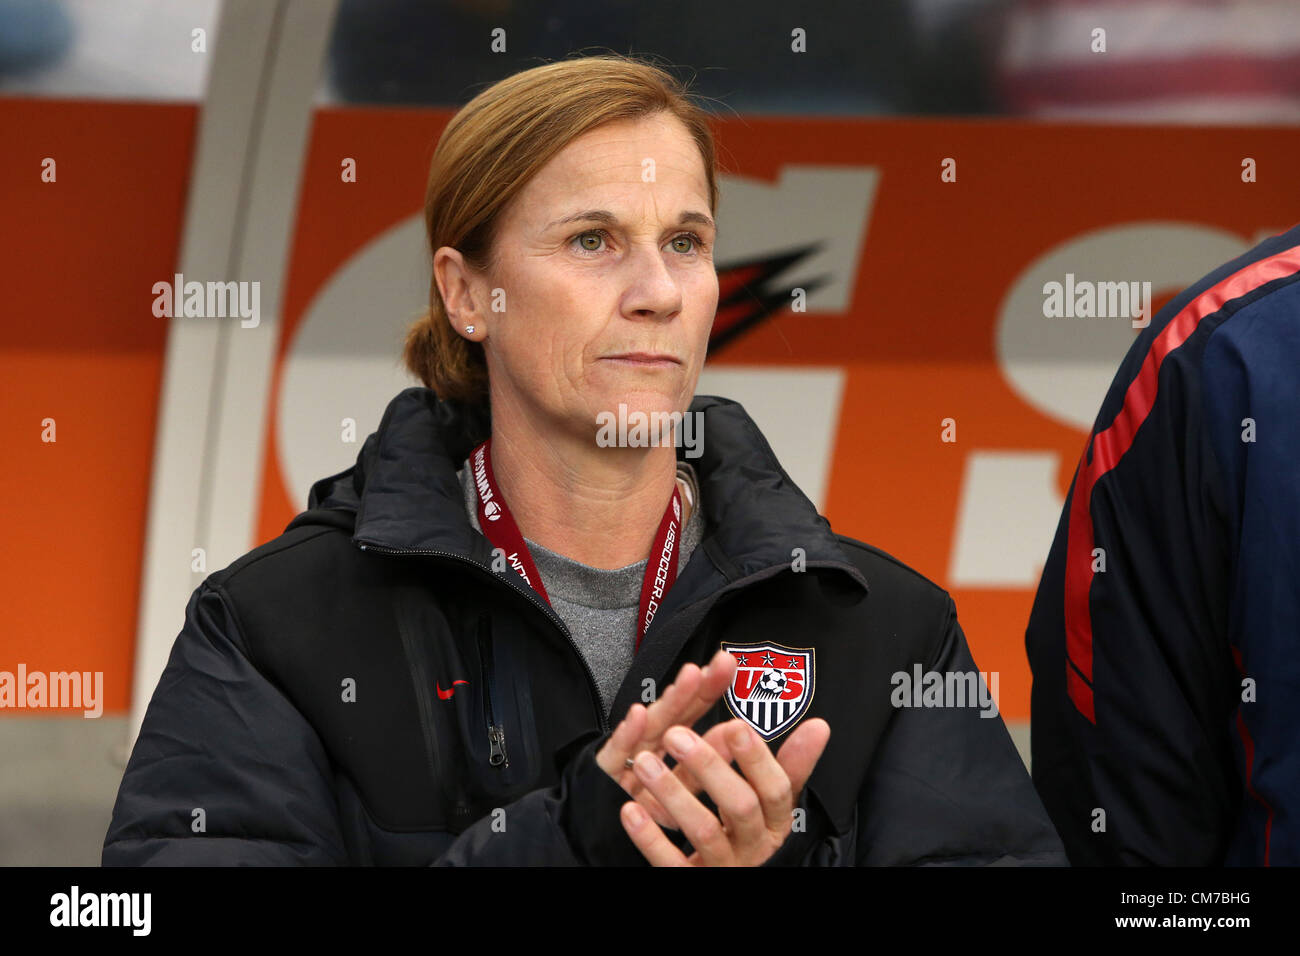 20.10.2012. Chicago, USA.  U.S. interim head coach Jillian Ellis. The United States Women's National Team played the Germany Women's National Team at Toyota Park in Bridgeview, Illinois in a women's international friendly soccer match. The game ended in a 1-1 tie. Stock Photo